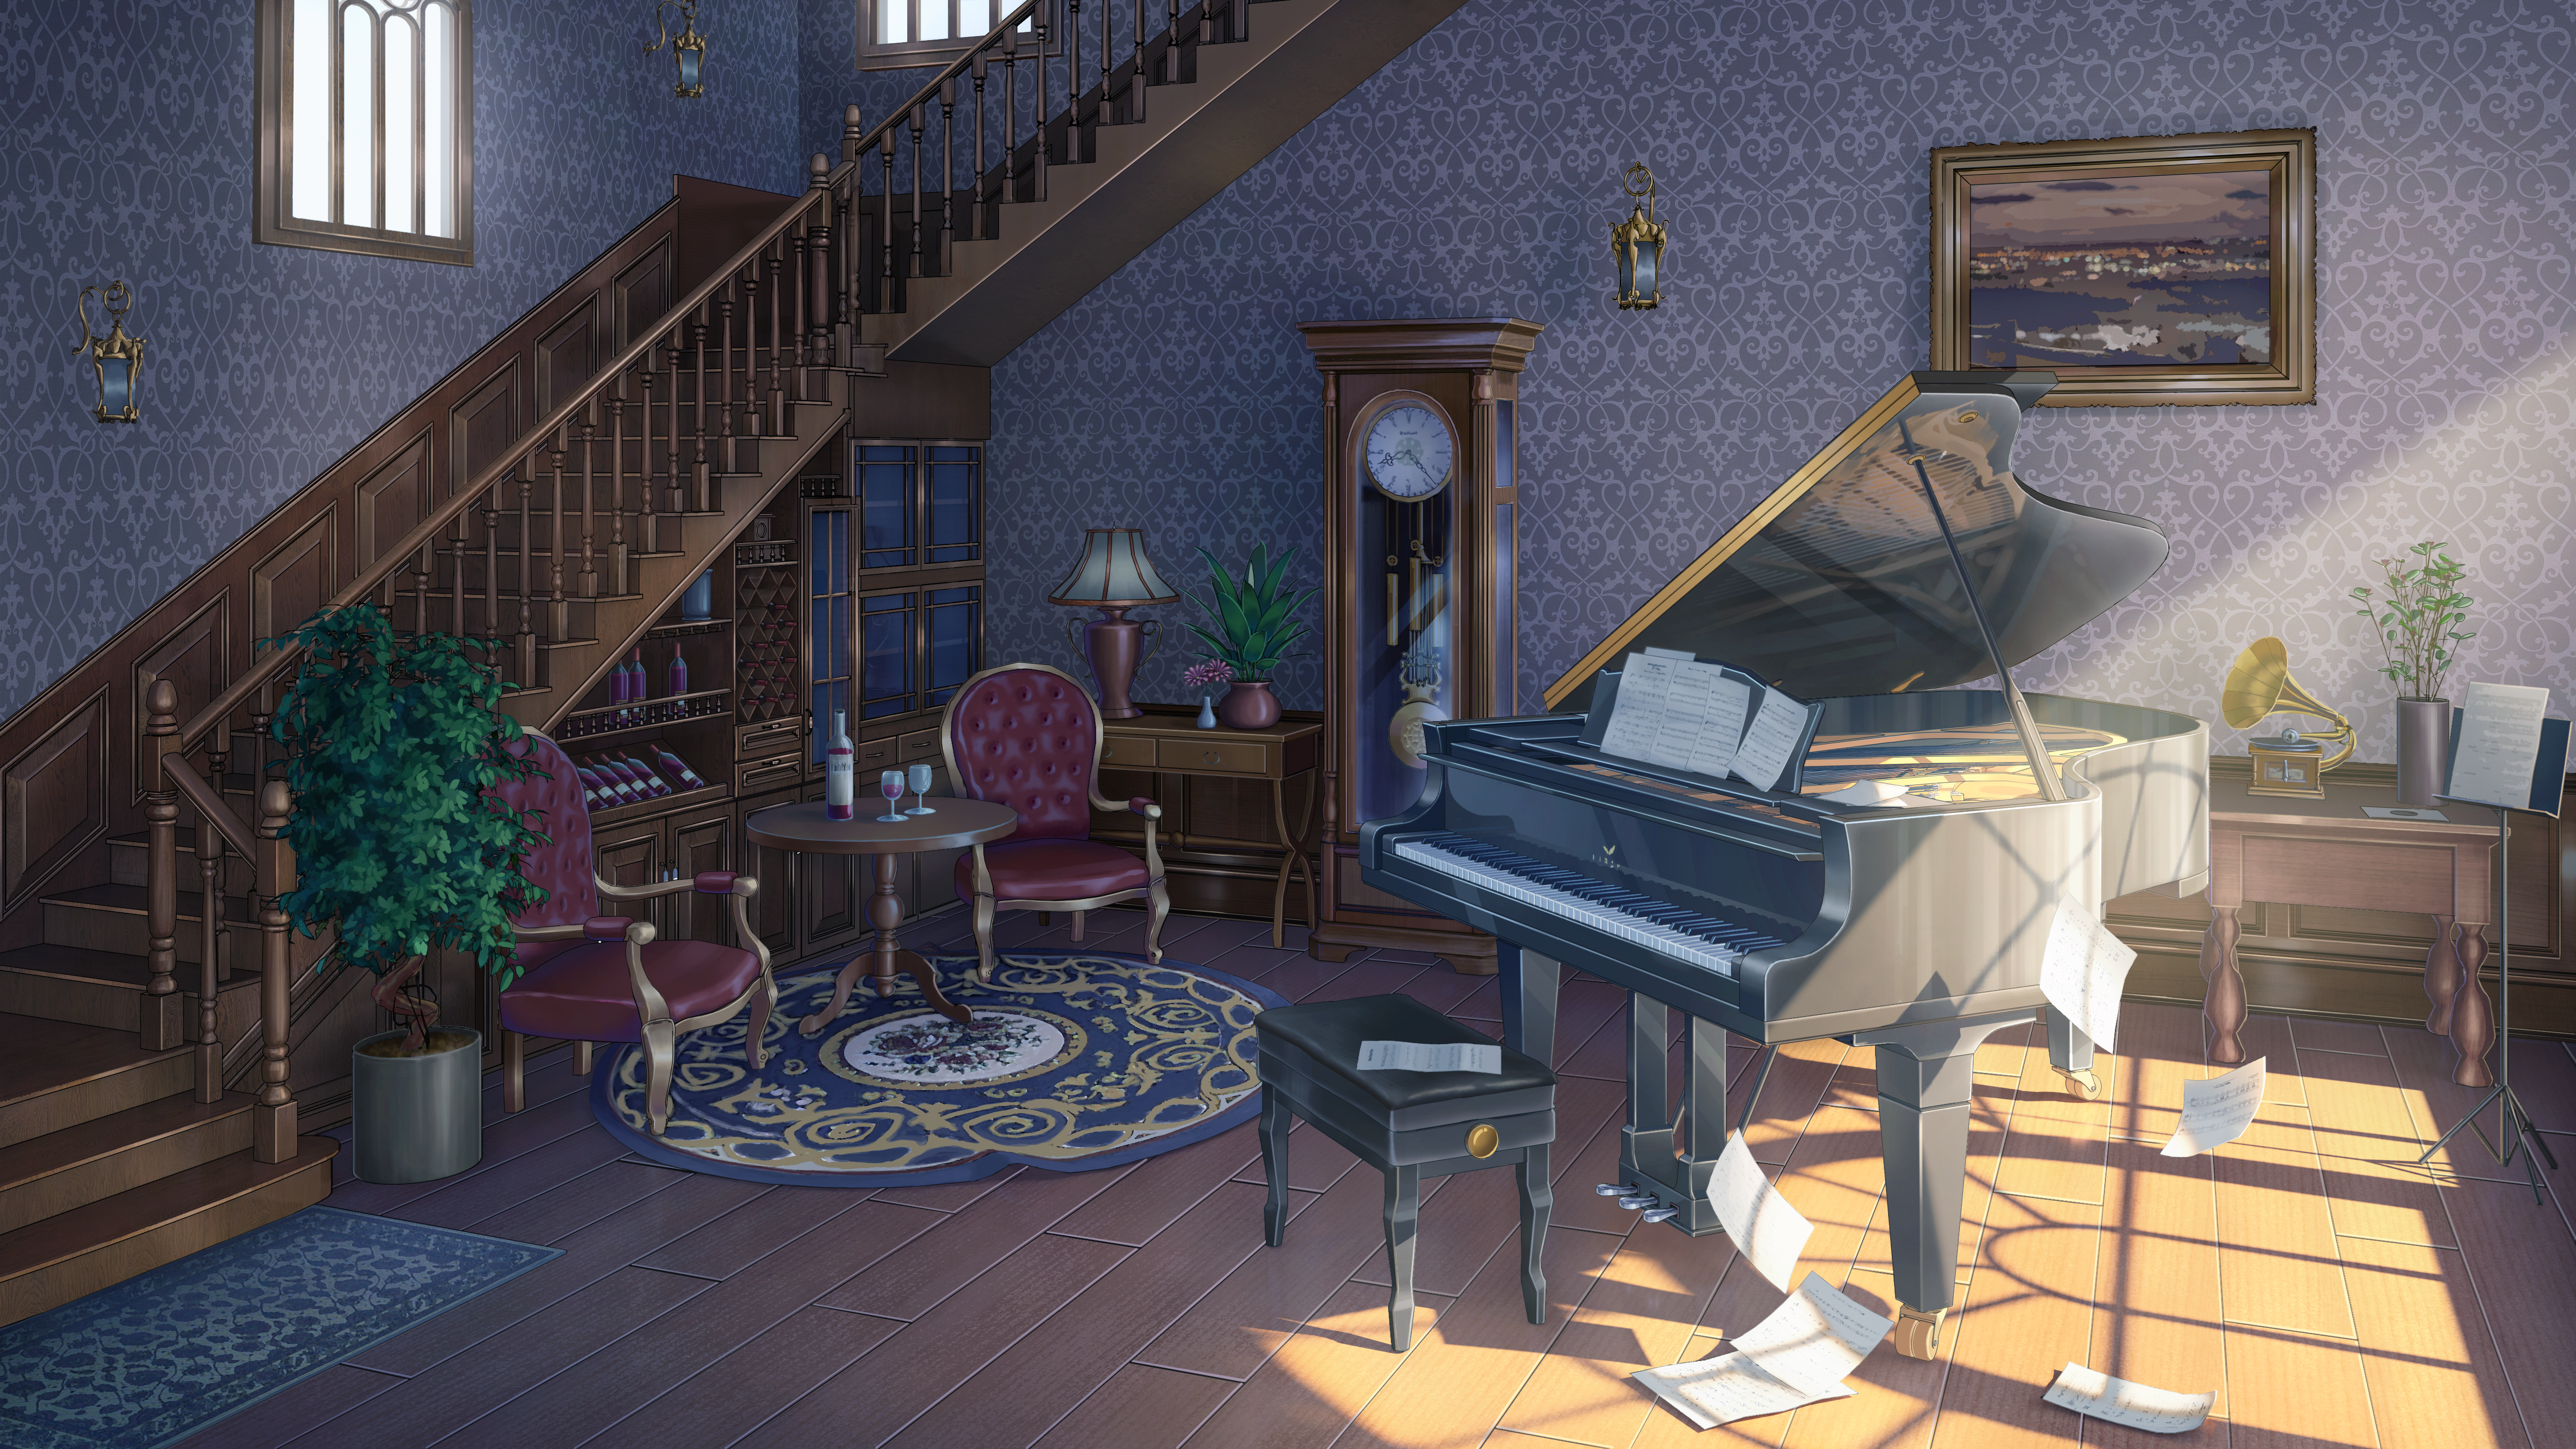 Indoors Grand Piano Piano Musical Instrument Stairs Paper 5000x2813